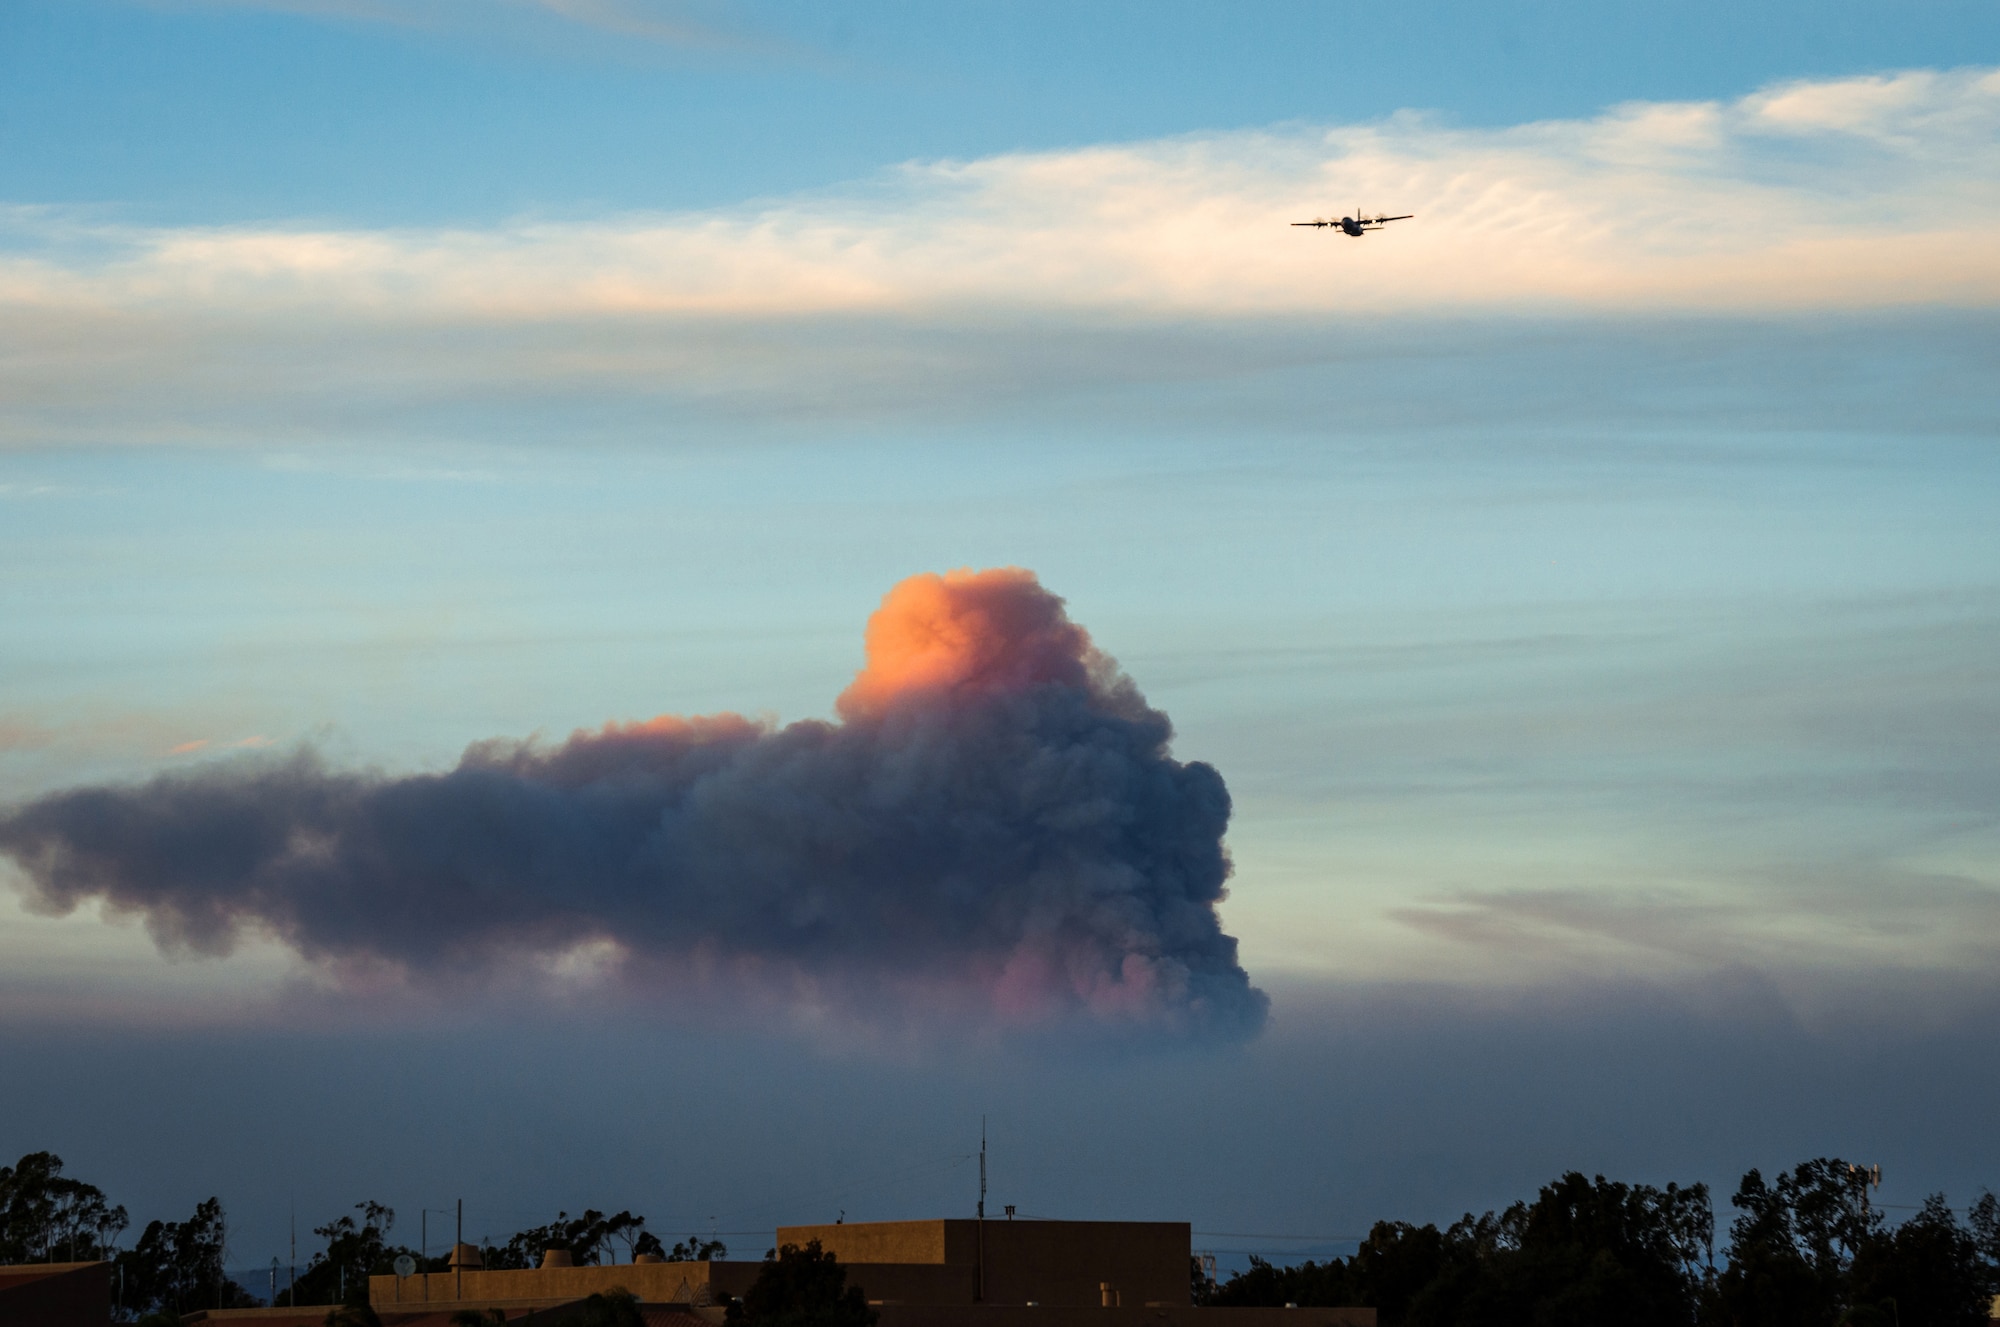 A C-130J of the 146th Airlift Wing, which carries the Modular Airborne Fire Fighting System (MAFFS), returns to Channel Islands Air National Guard Base in Port Hueneme, California, after dropping flame retardant chemicals on the Thomas Fire burning in Ventura and Santa Barbara Counties, Dec. 9, 2017. (U.S. Air Force photo by J.M. Eddins Jr.)